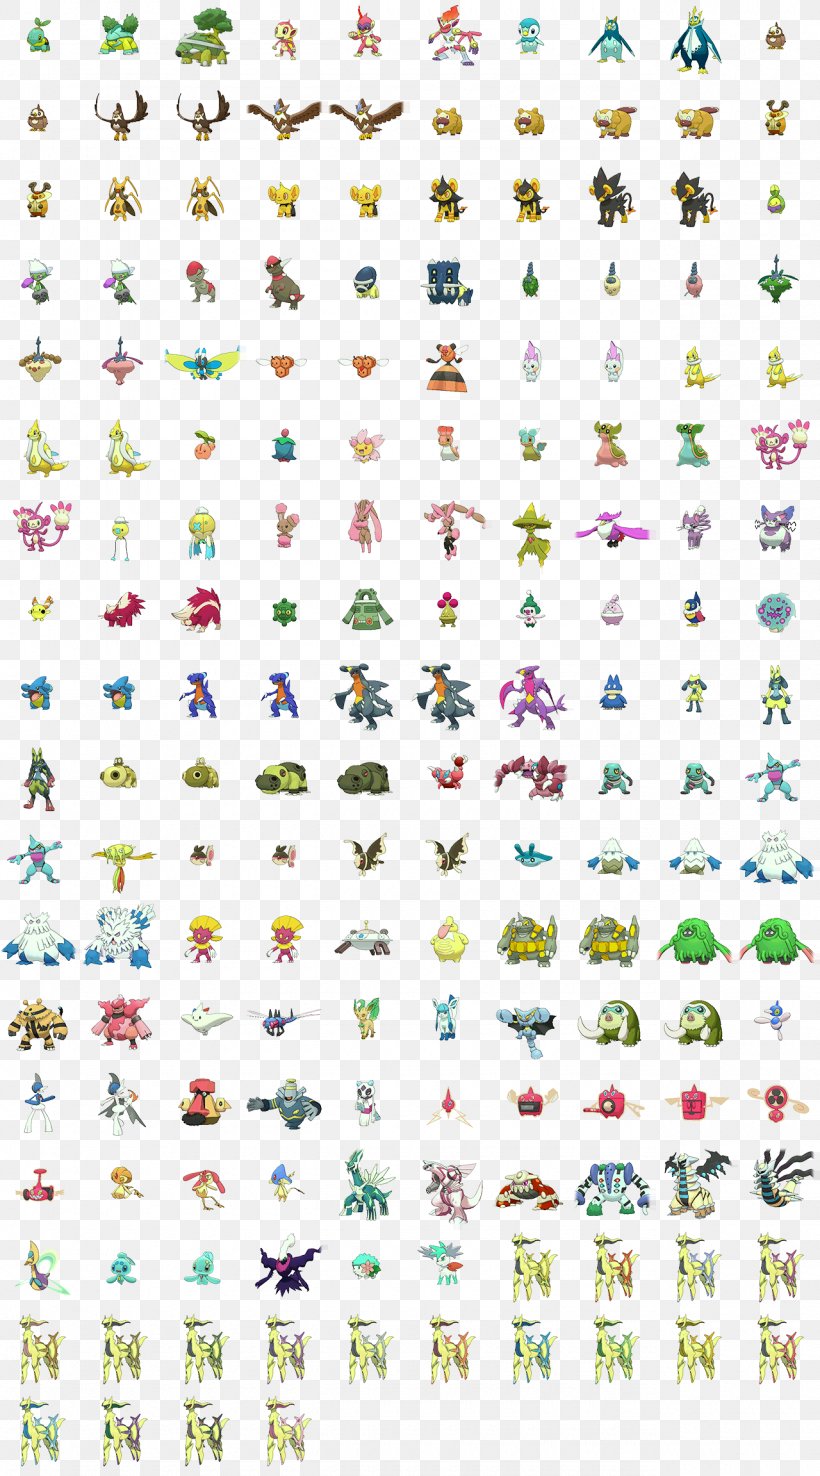 Pokémon Omega Ruby And Alpha Sapphire Pokémon Ruby And Sapphire Word Search Sinnoh, PNG, 1280x2304px, Pokemon Ruby And Sapphire, Game, Mewtwo, Piloswine, Pokedex Download Free